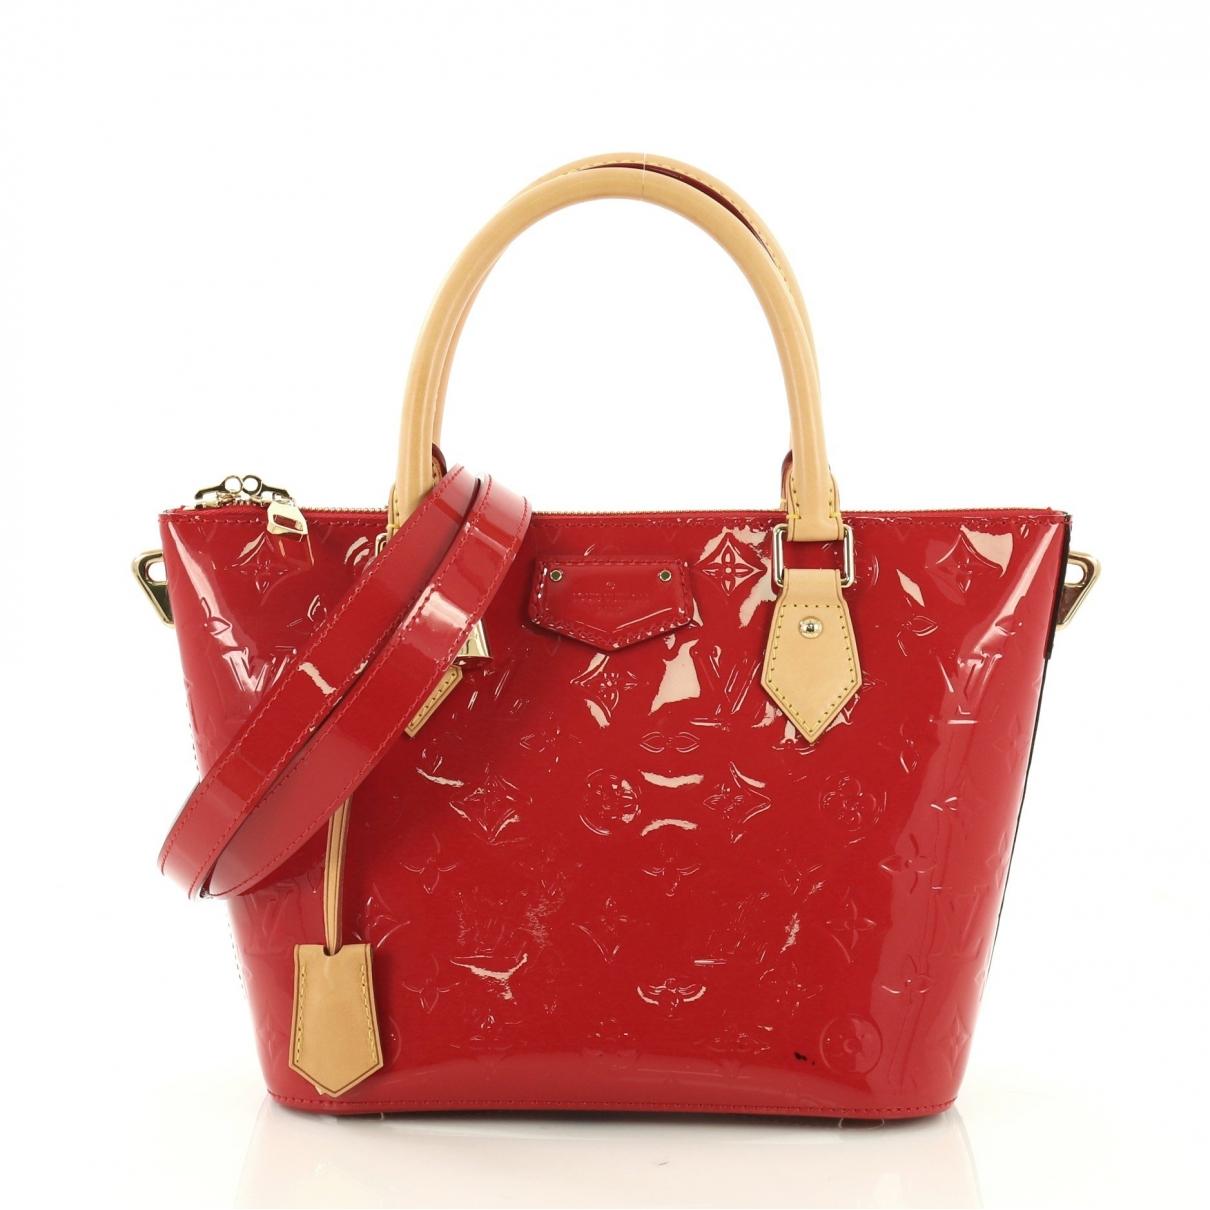 Lyst - Louis Vuitton Red Patent Leather Handbag in Red